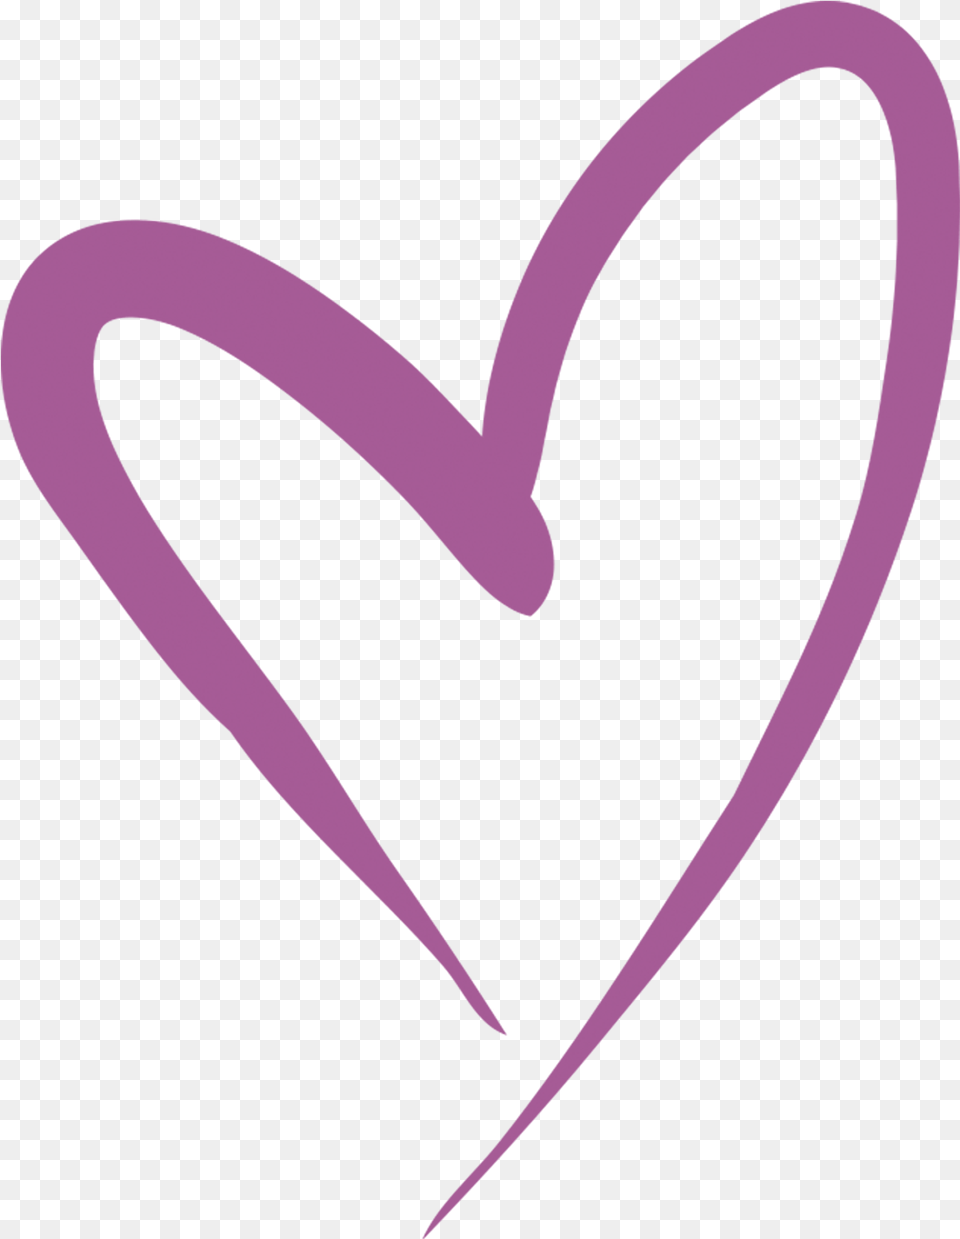 Black Transparent Heart Sketch Transparent Heart Sketch, Clothing, Hat, Bow, Weapon Free Png